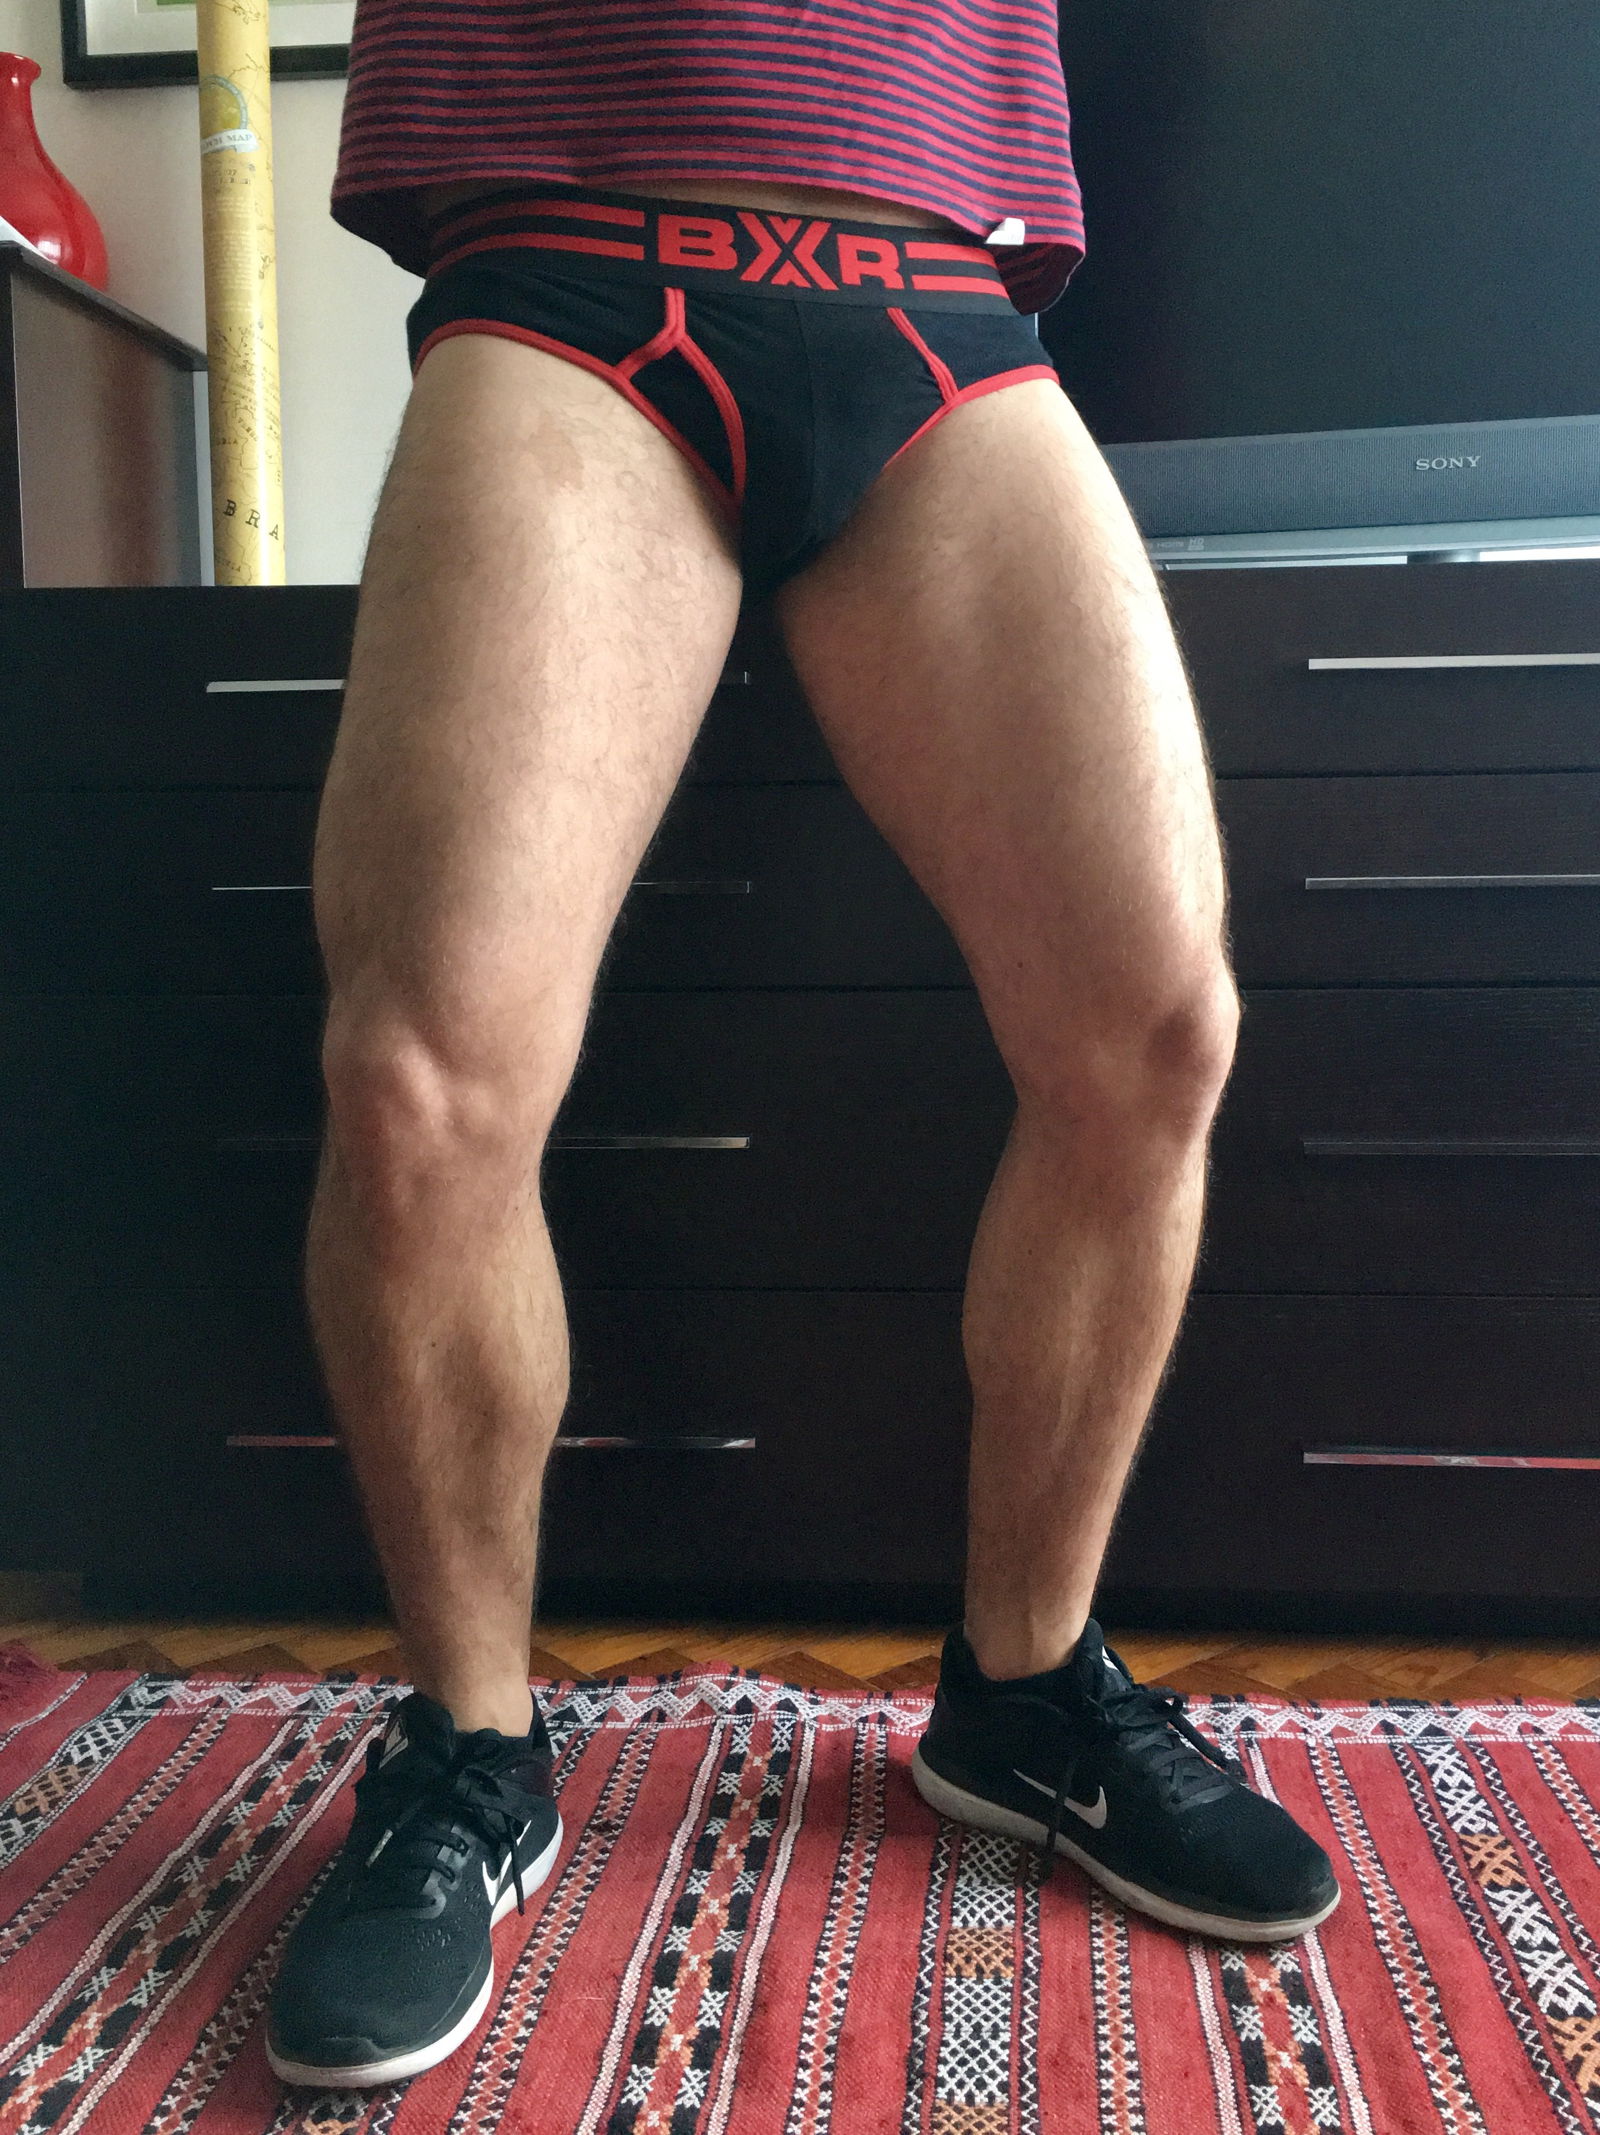 Watch the Photo by Fan in Heat with the username @faninheat, who is a verified user, posted on March 6, 2019. The post is about the topic Gay Underwear. and the text says '#briefs'